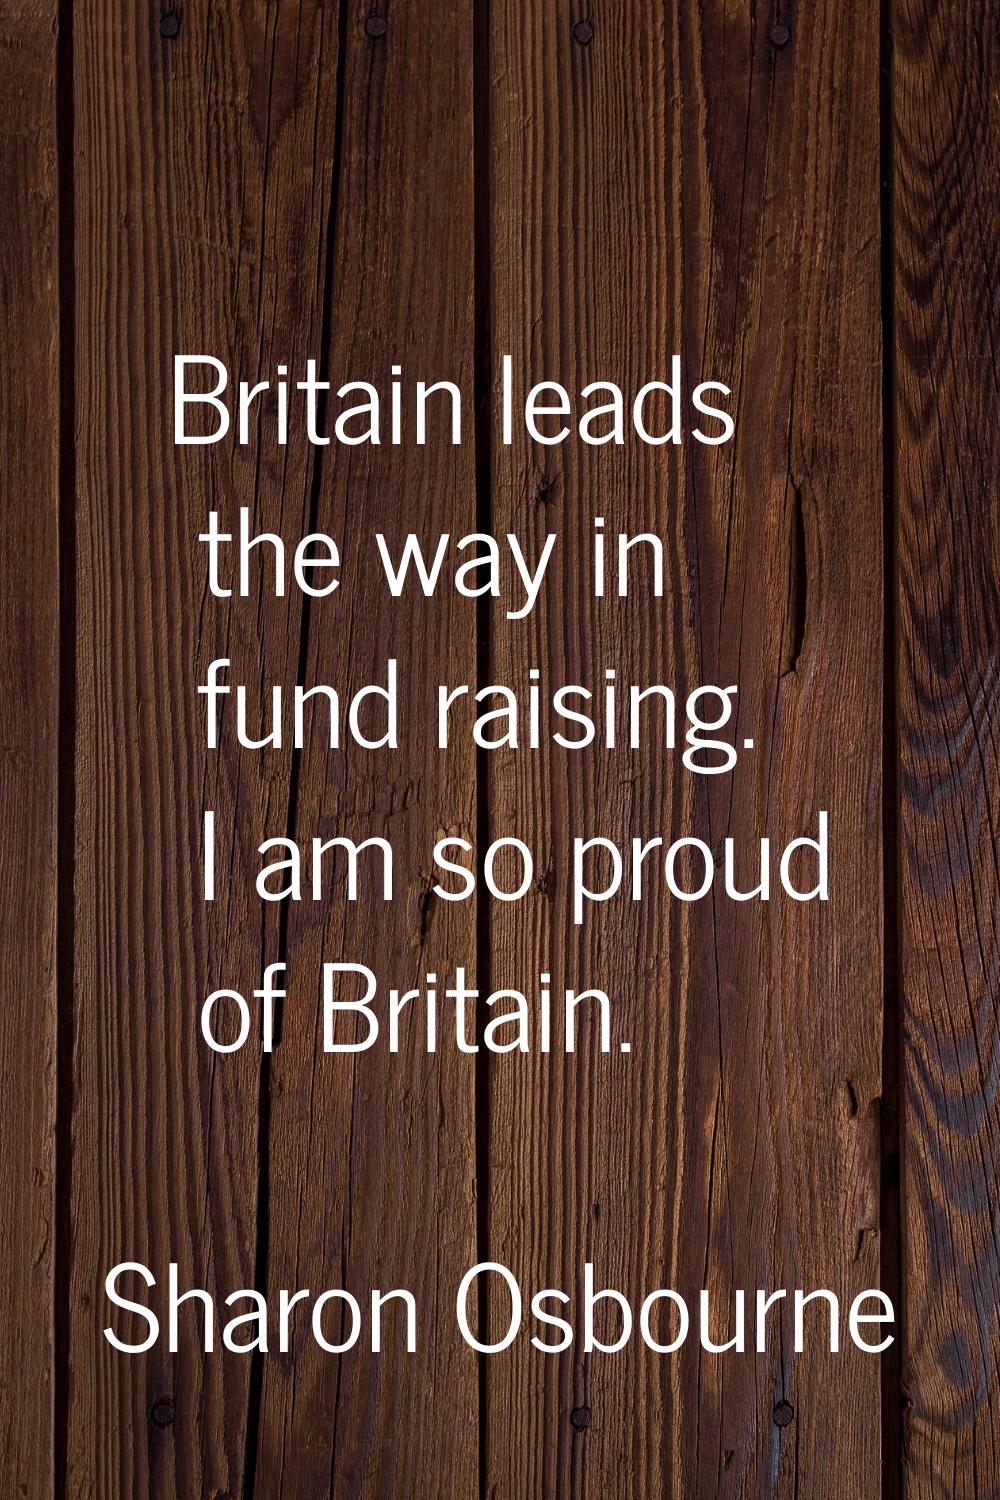 Britain leads the way in fund raising. I am so proud of Britain.